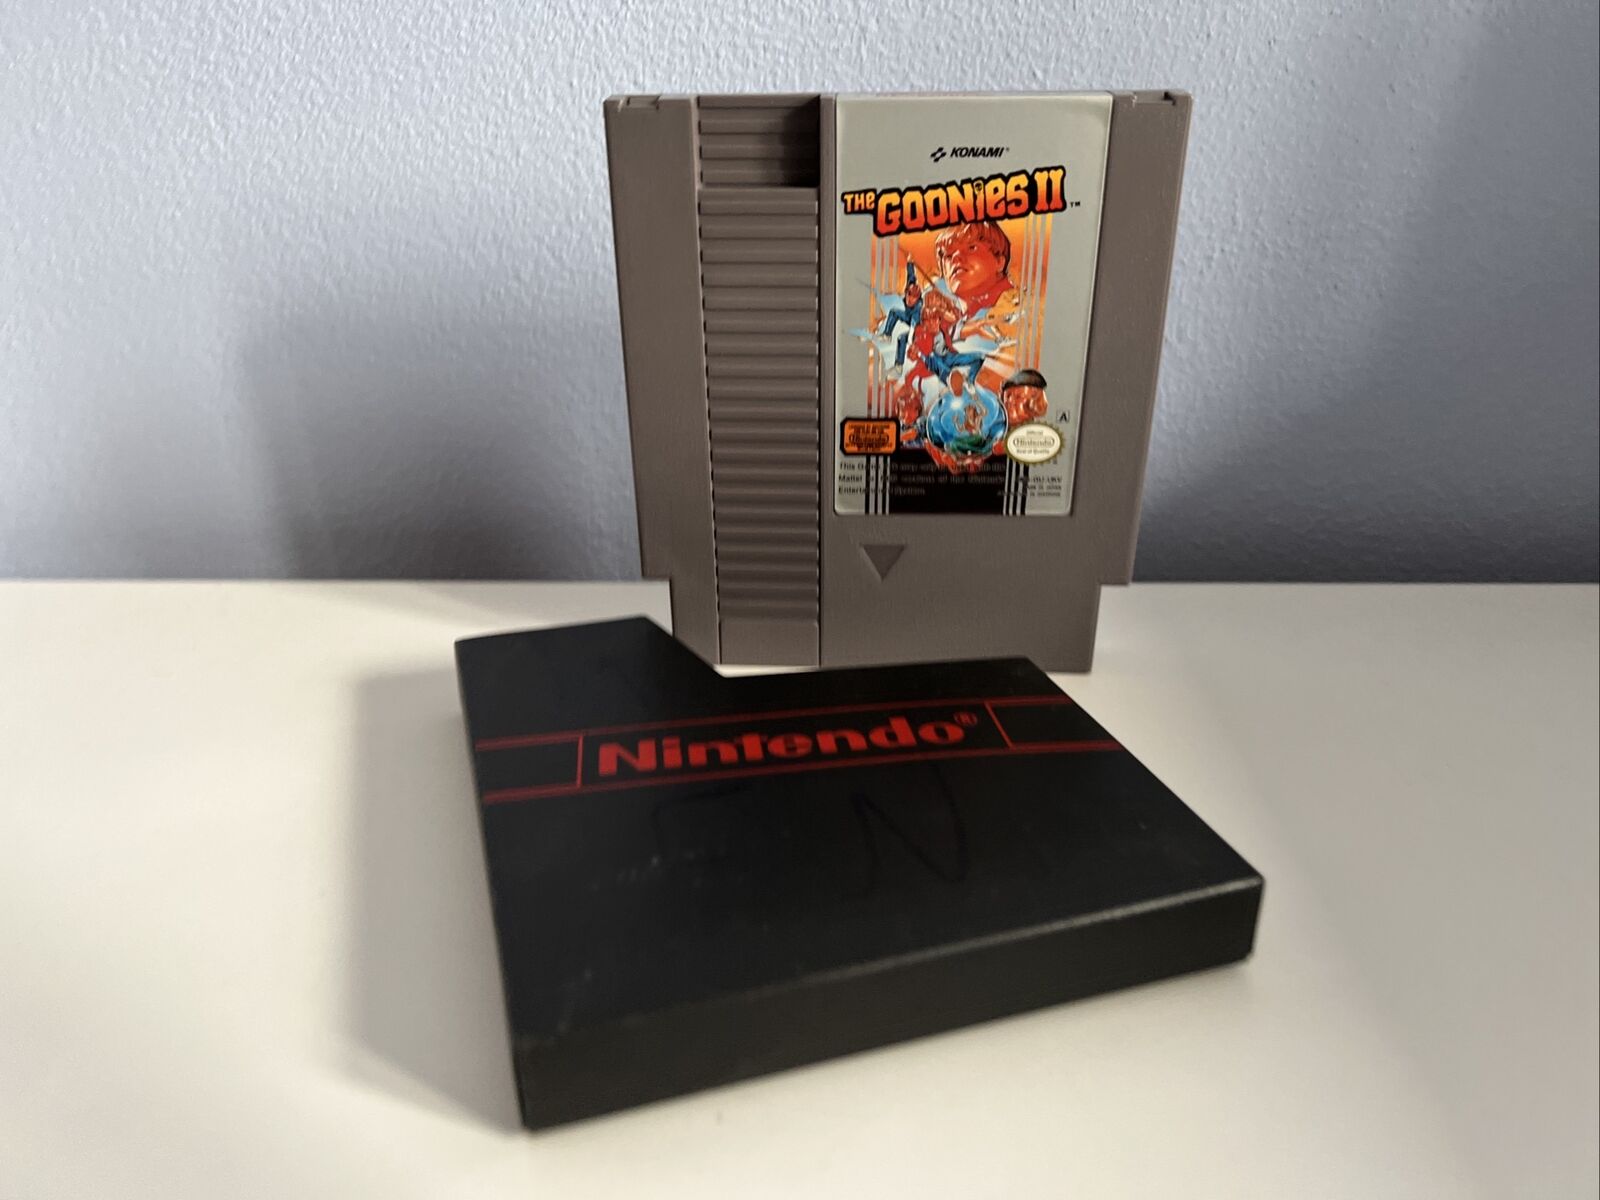 Nintendo-Nes-Videogioco-The-Gonnies-II-Pal-A-133929183780